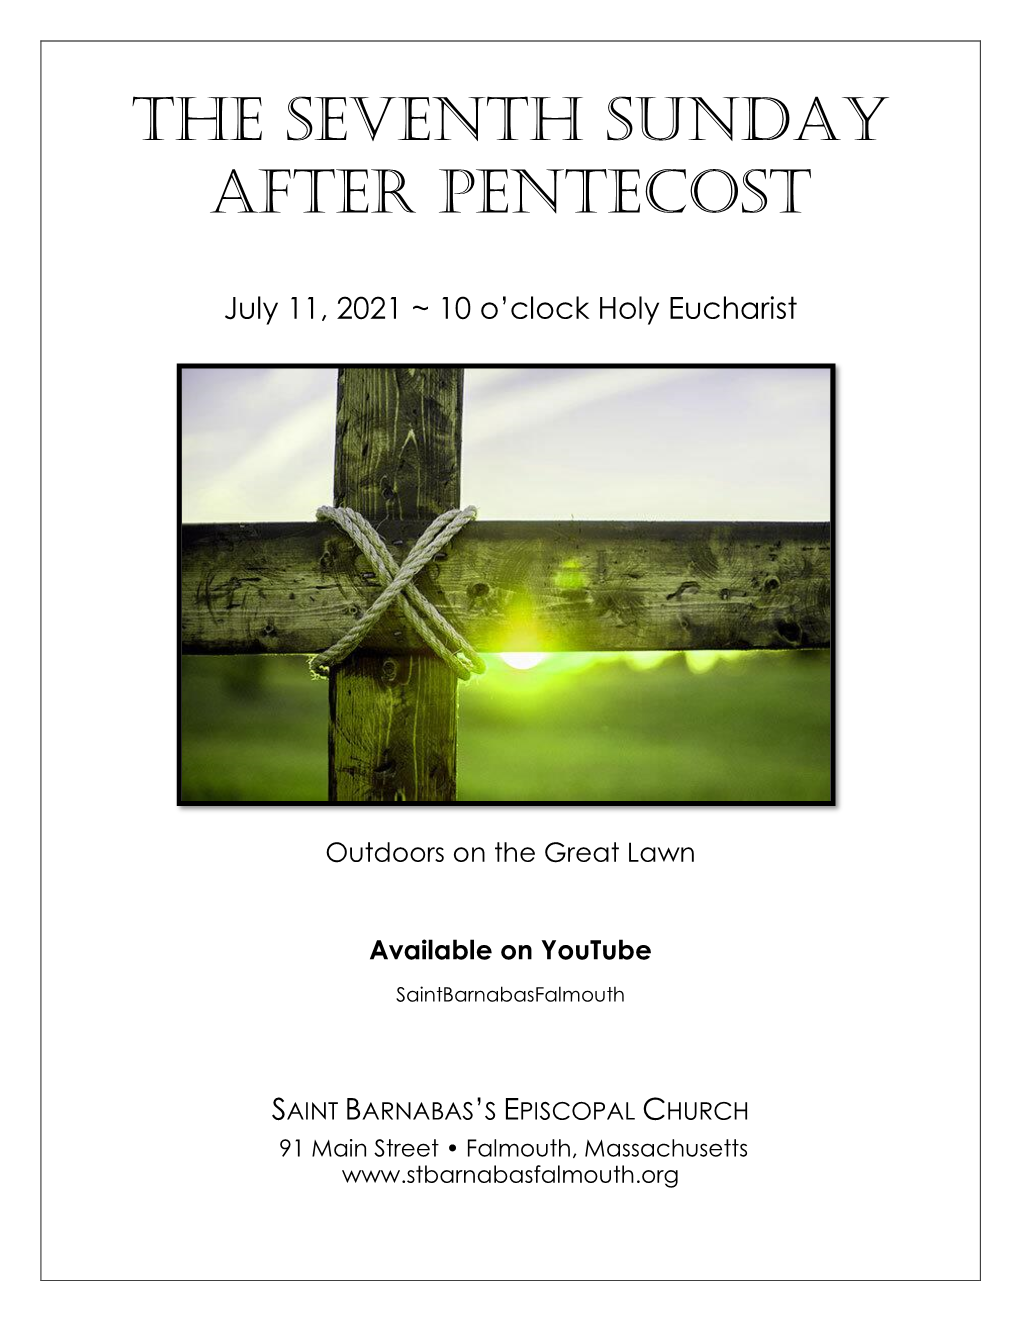 The Seventh Sunday After Pentecost